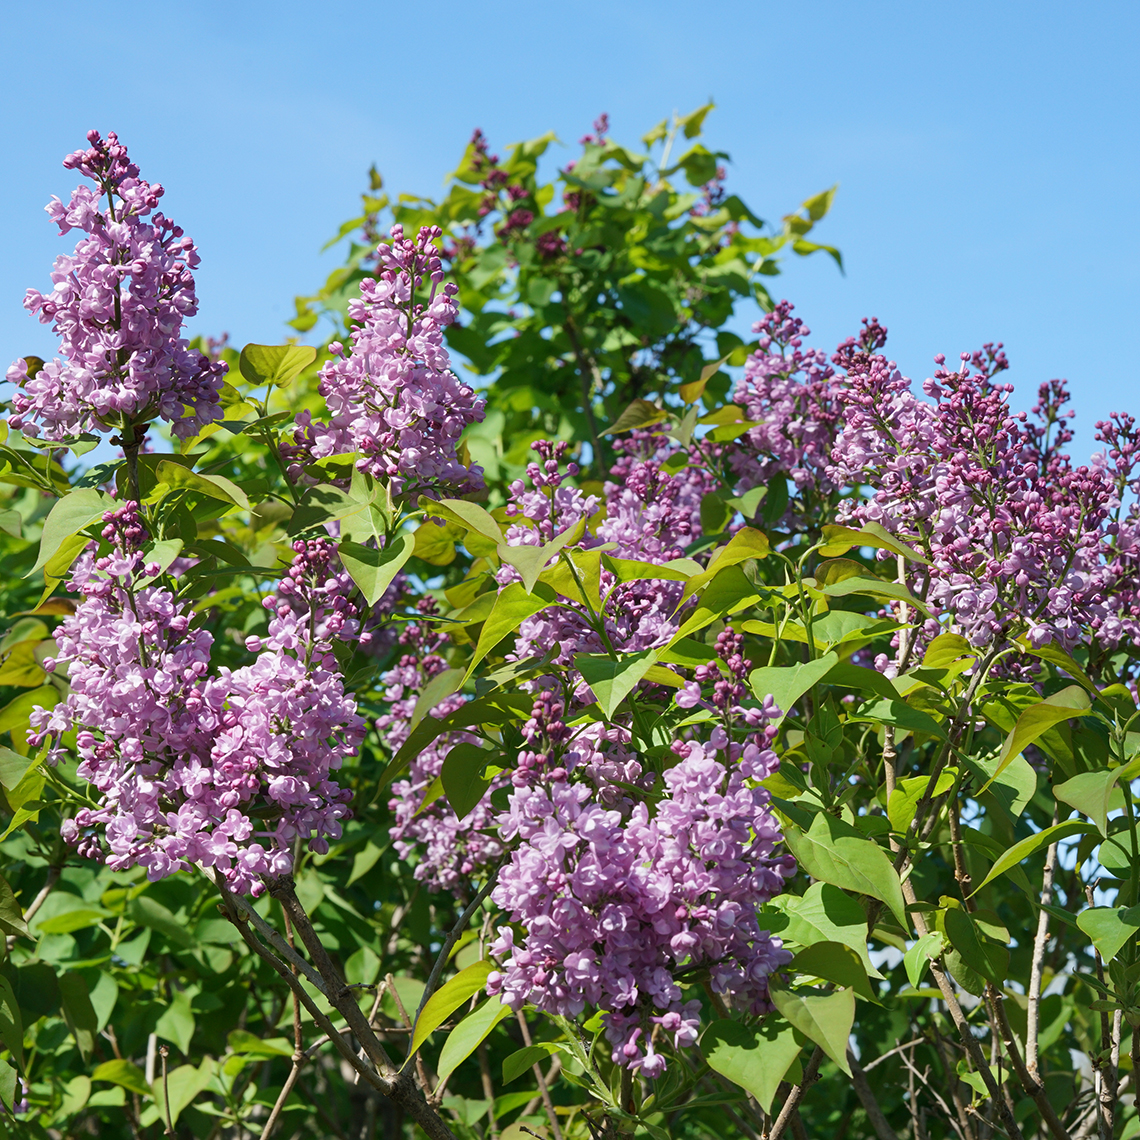 Flowers of Scentara Double Blue lilac against a blue sky